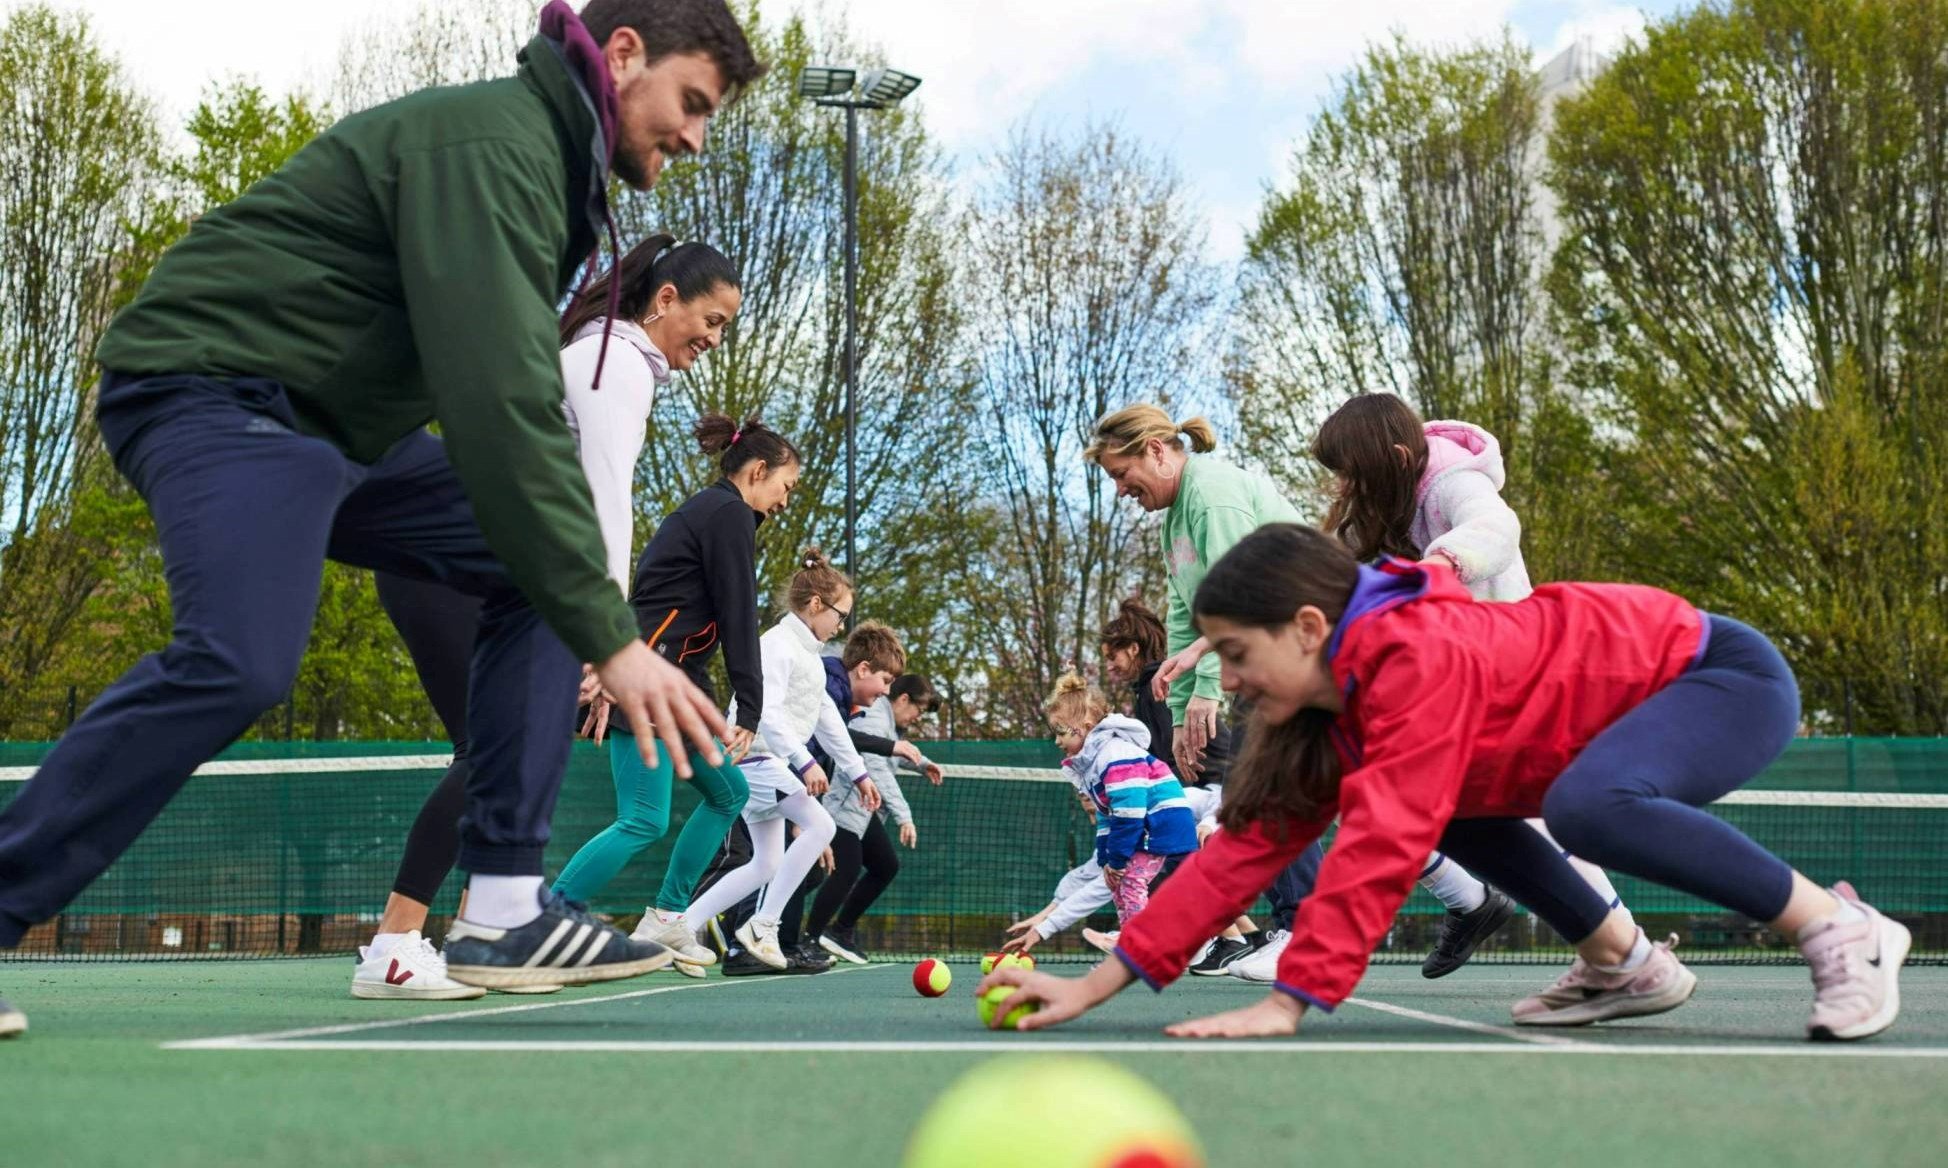 A Free Park Tennis session in action with players enjoying a warm-up drill